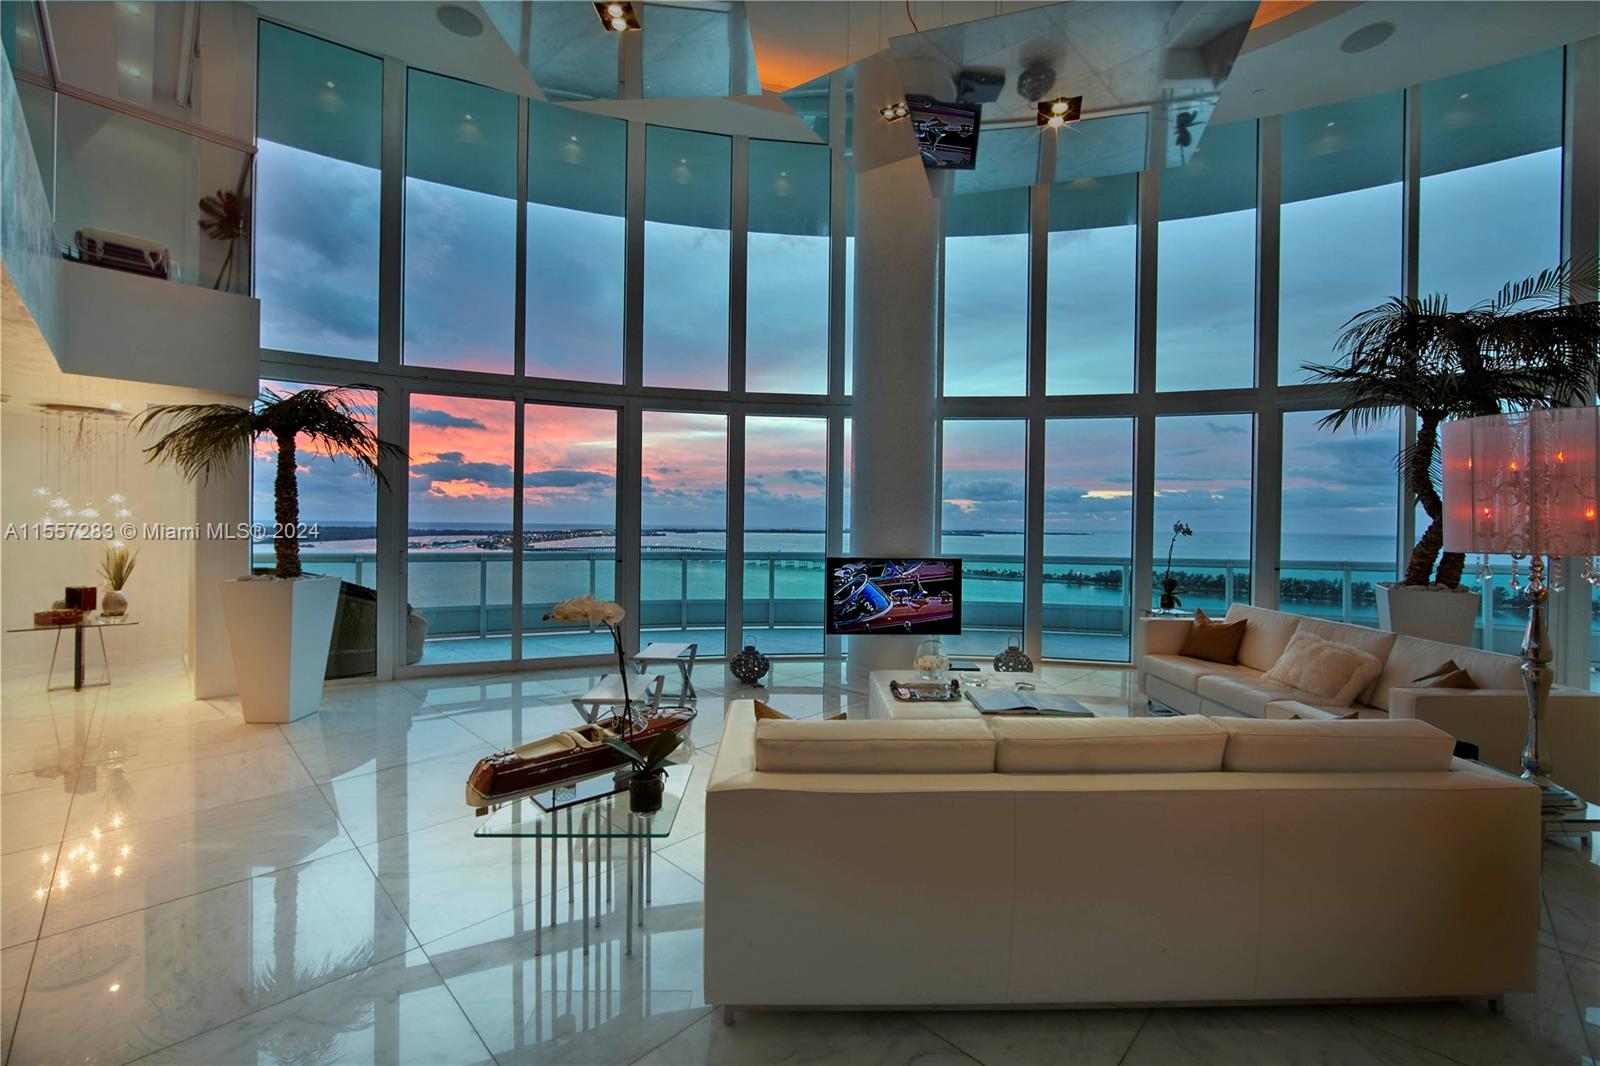 Modern and elegant 2 story unit with double height ceiling at Santa Maria in Brickell. 4BR/4.5BA totaling 5,730 Sqft (532m2) of interior plus a wraparound Balcony. Unobstructed views overlooking direct Ocean, Downtown Skyline & Key Biscayne. Custom design detail includes a spacious living and dining area, entertaining space, lots of walking closets, marble interior finishes and floor to celling windows. Option to buy a private dock is available with this unit up to 90 ft yacht (a few options avail). 3 parking spaces. Amenities include a bay front pool, marina, fitness center in the sky, billiards, business center and a 6,000 Sqft clubhouse.